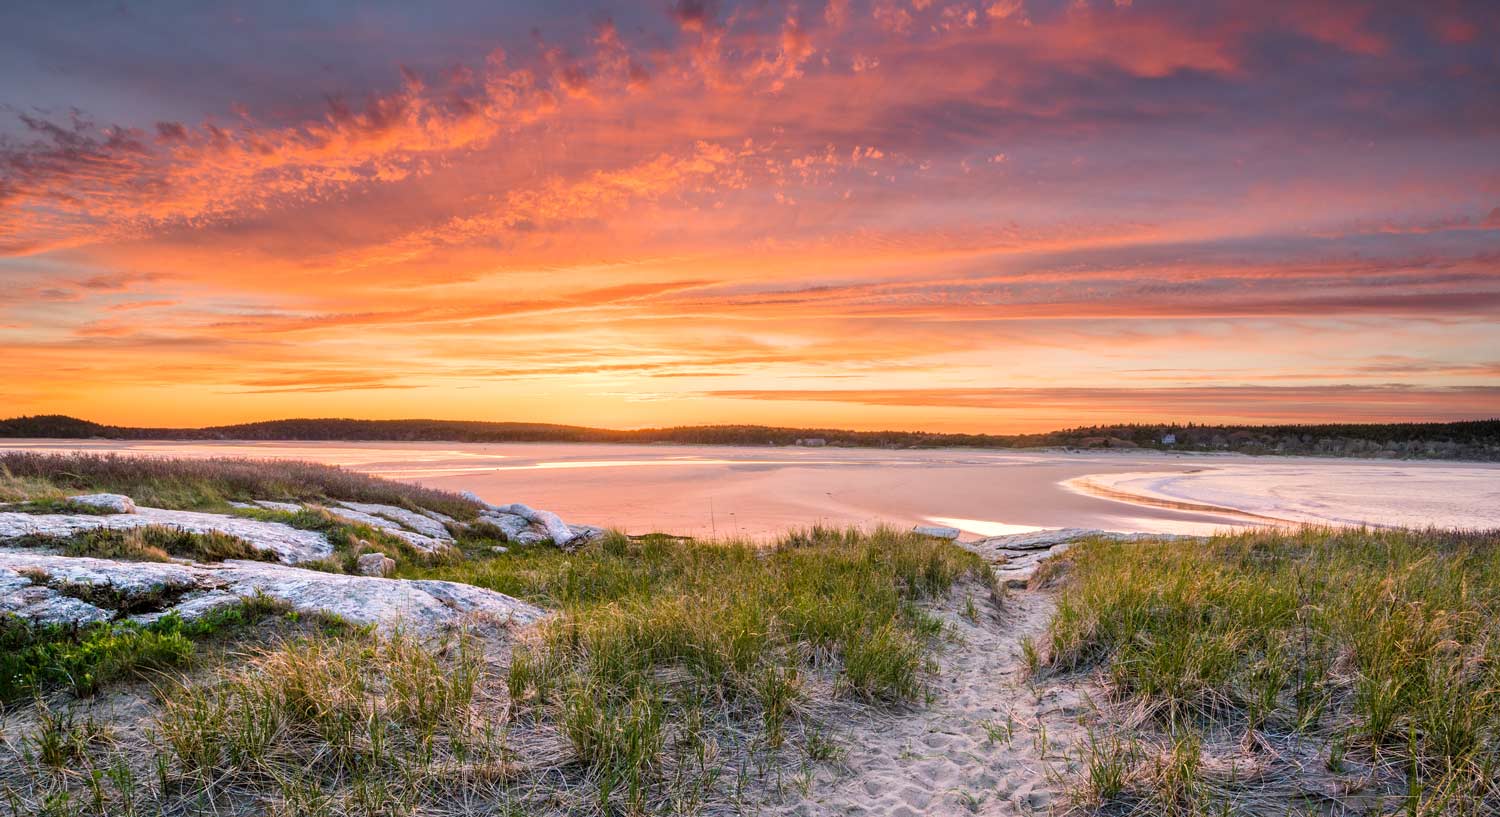 Popham Beach, one of many romantic spots in Maine